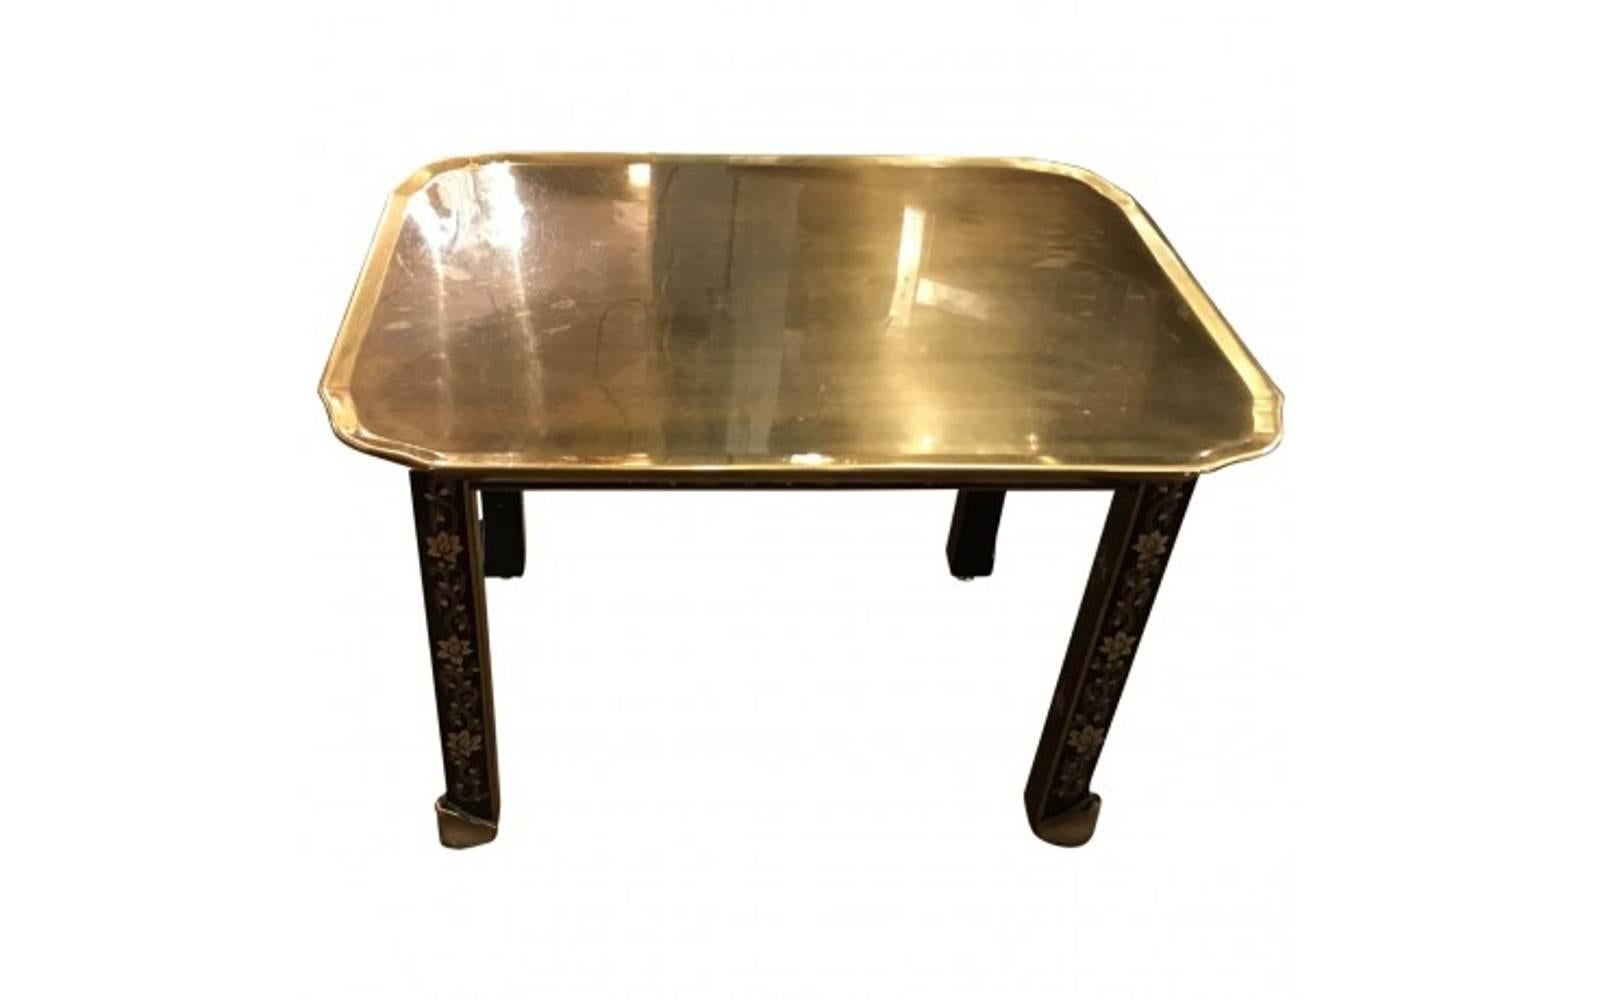 A Classic vintage piece from the 1950s, this elegant side table features a gleaming brass tray top supported by slender legs decorated in a charming floral pattern. With its understated modern design and romantic accents, this table provides a